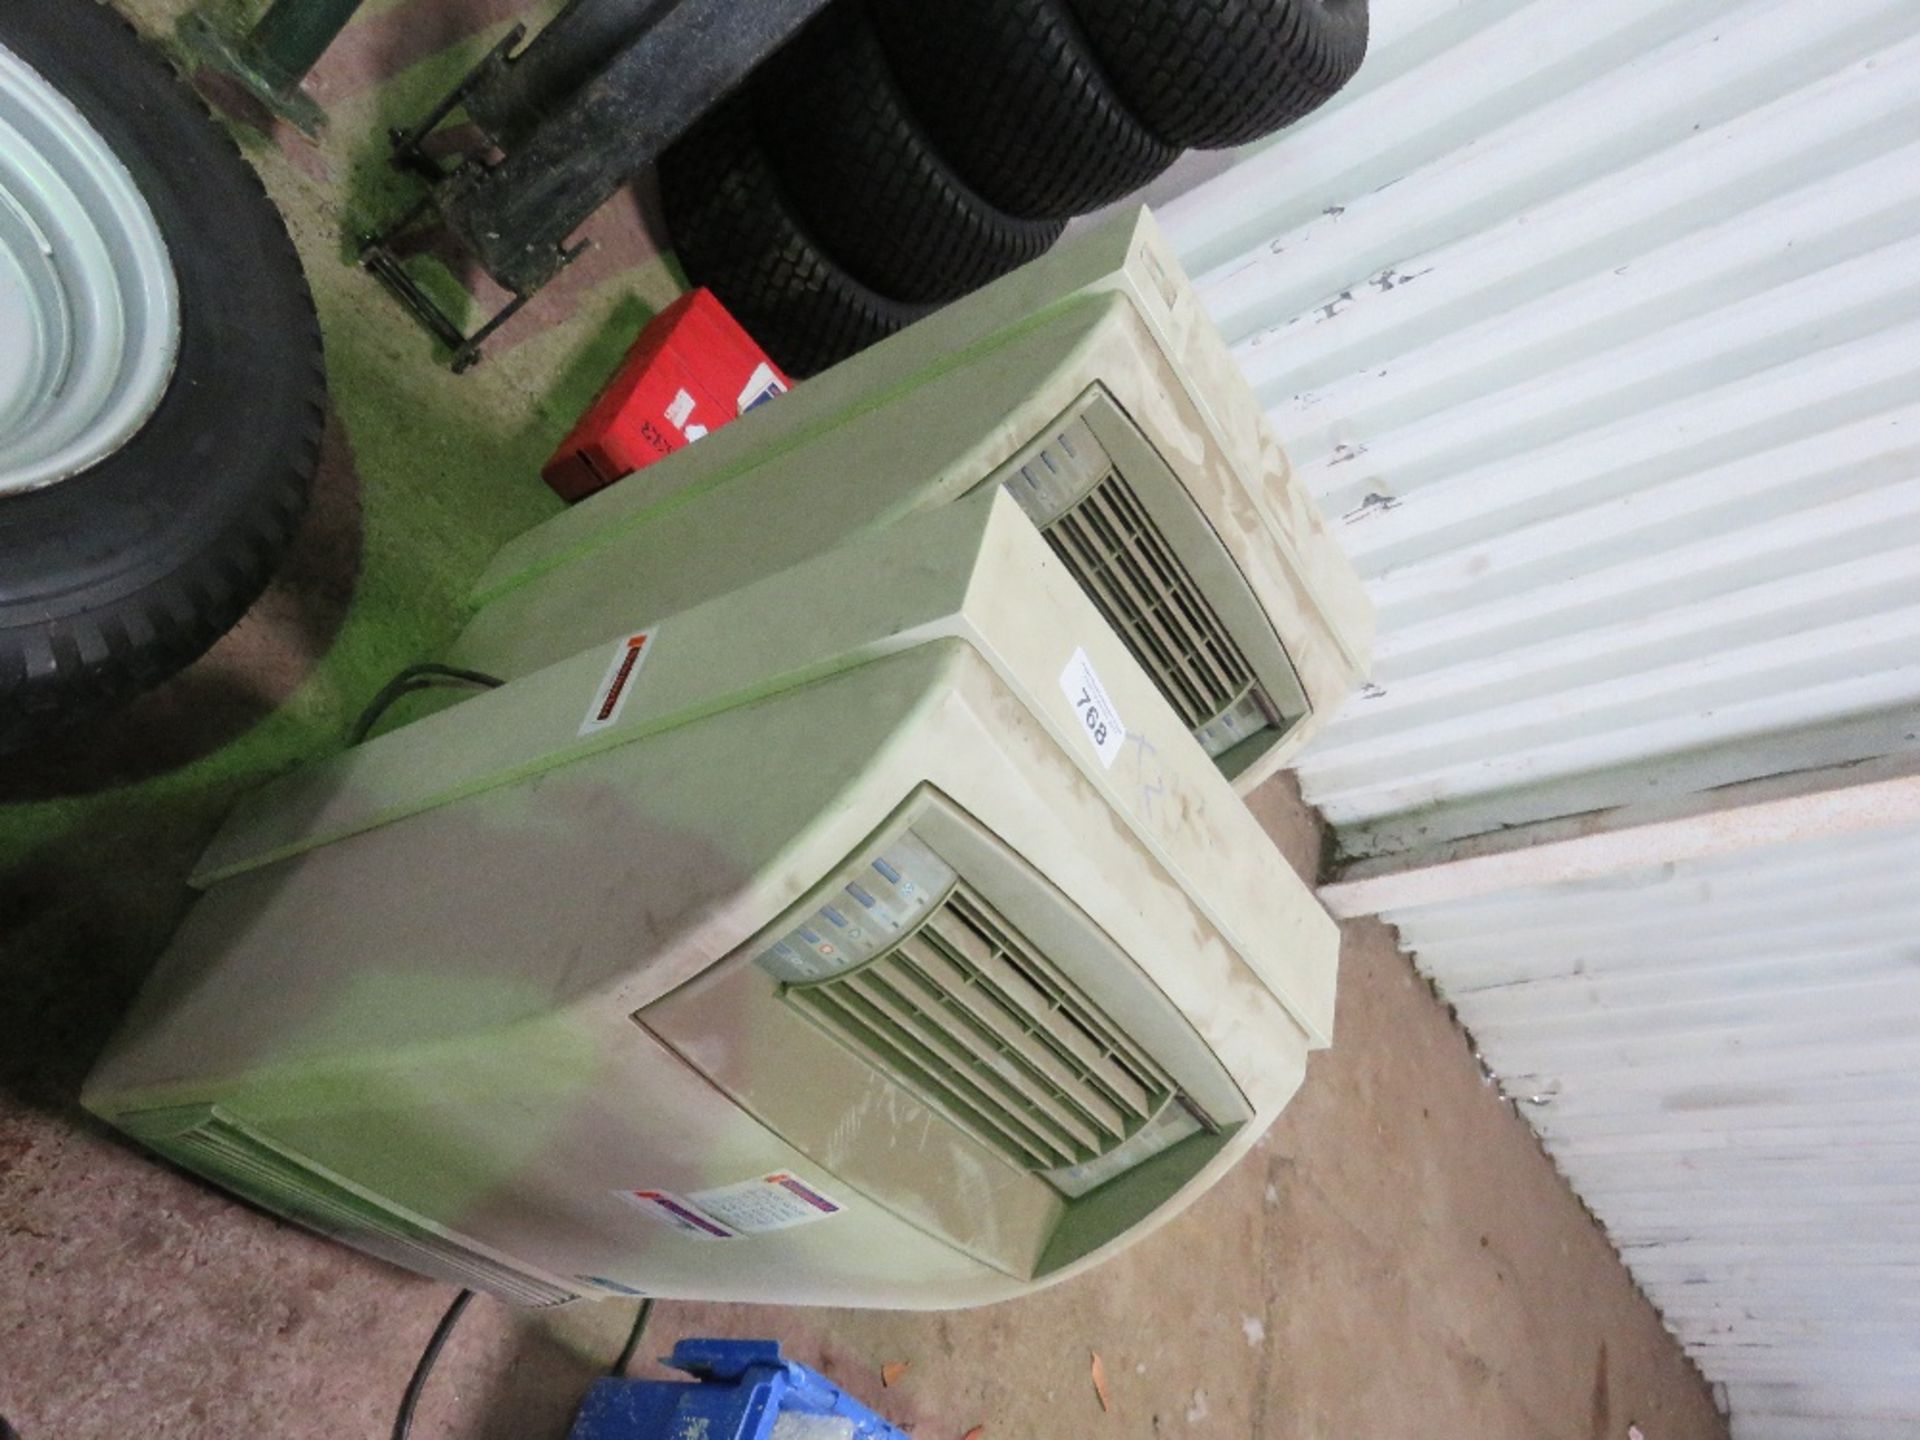 2 X HEAVY DUTY AIR CONDITIONERS, 240VOLT POWERED. - Image 2 of 5